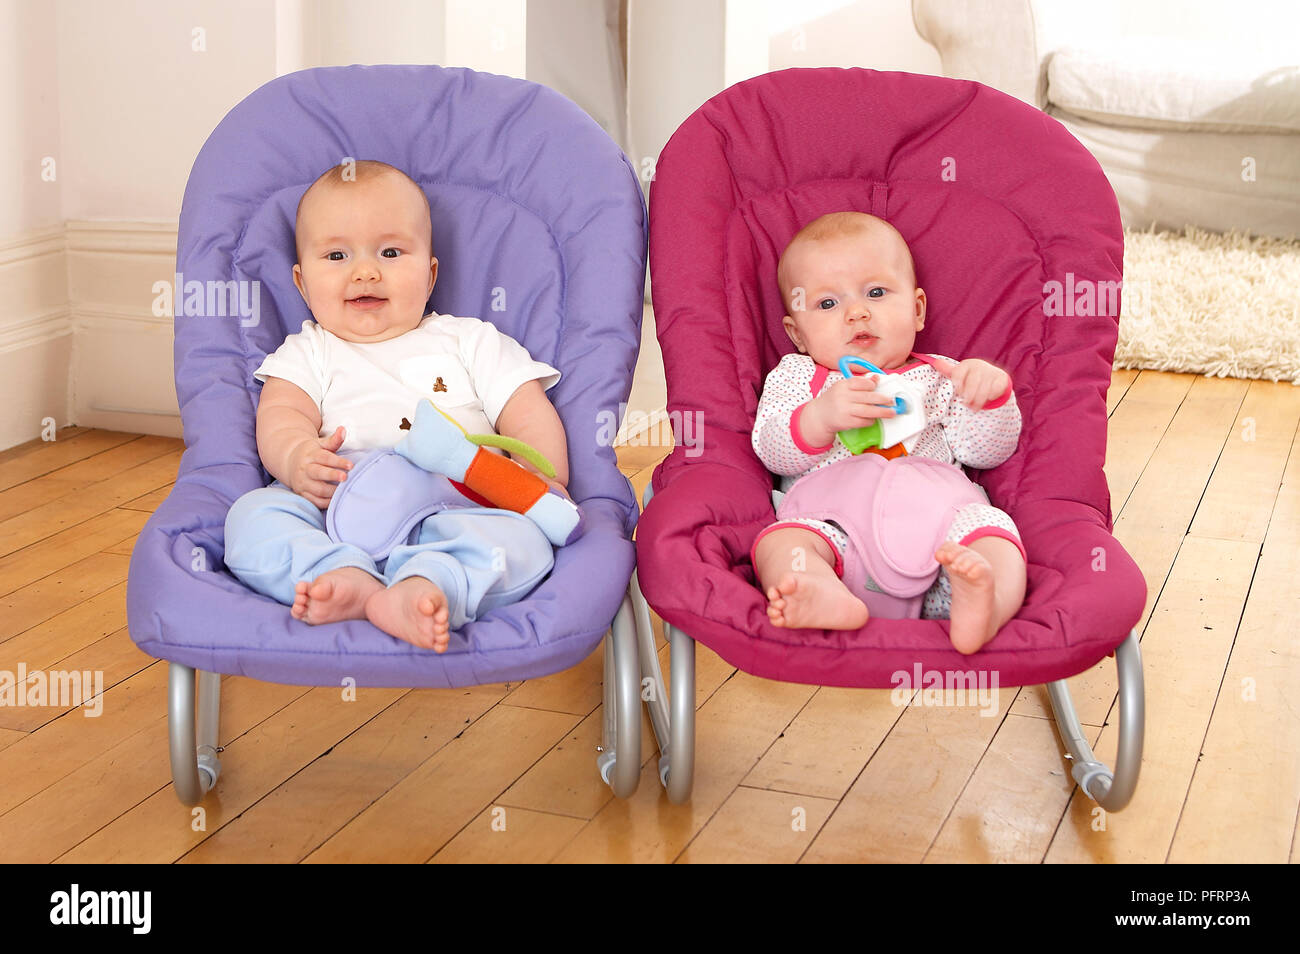 twin bouncer chairs